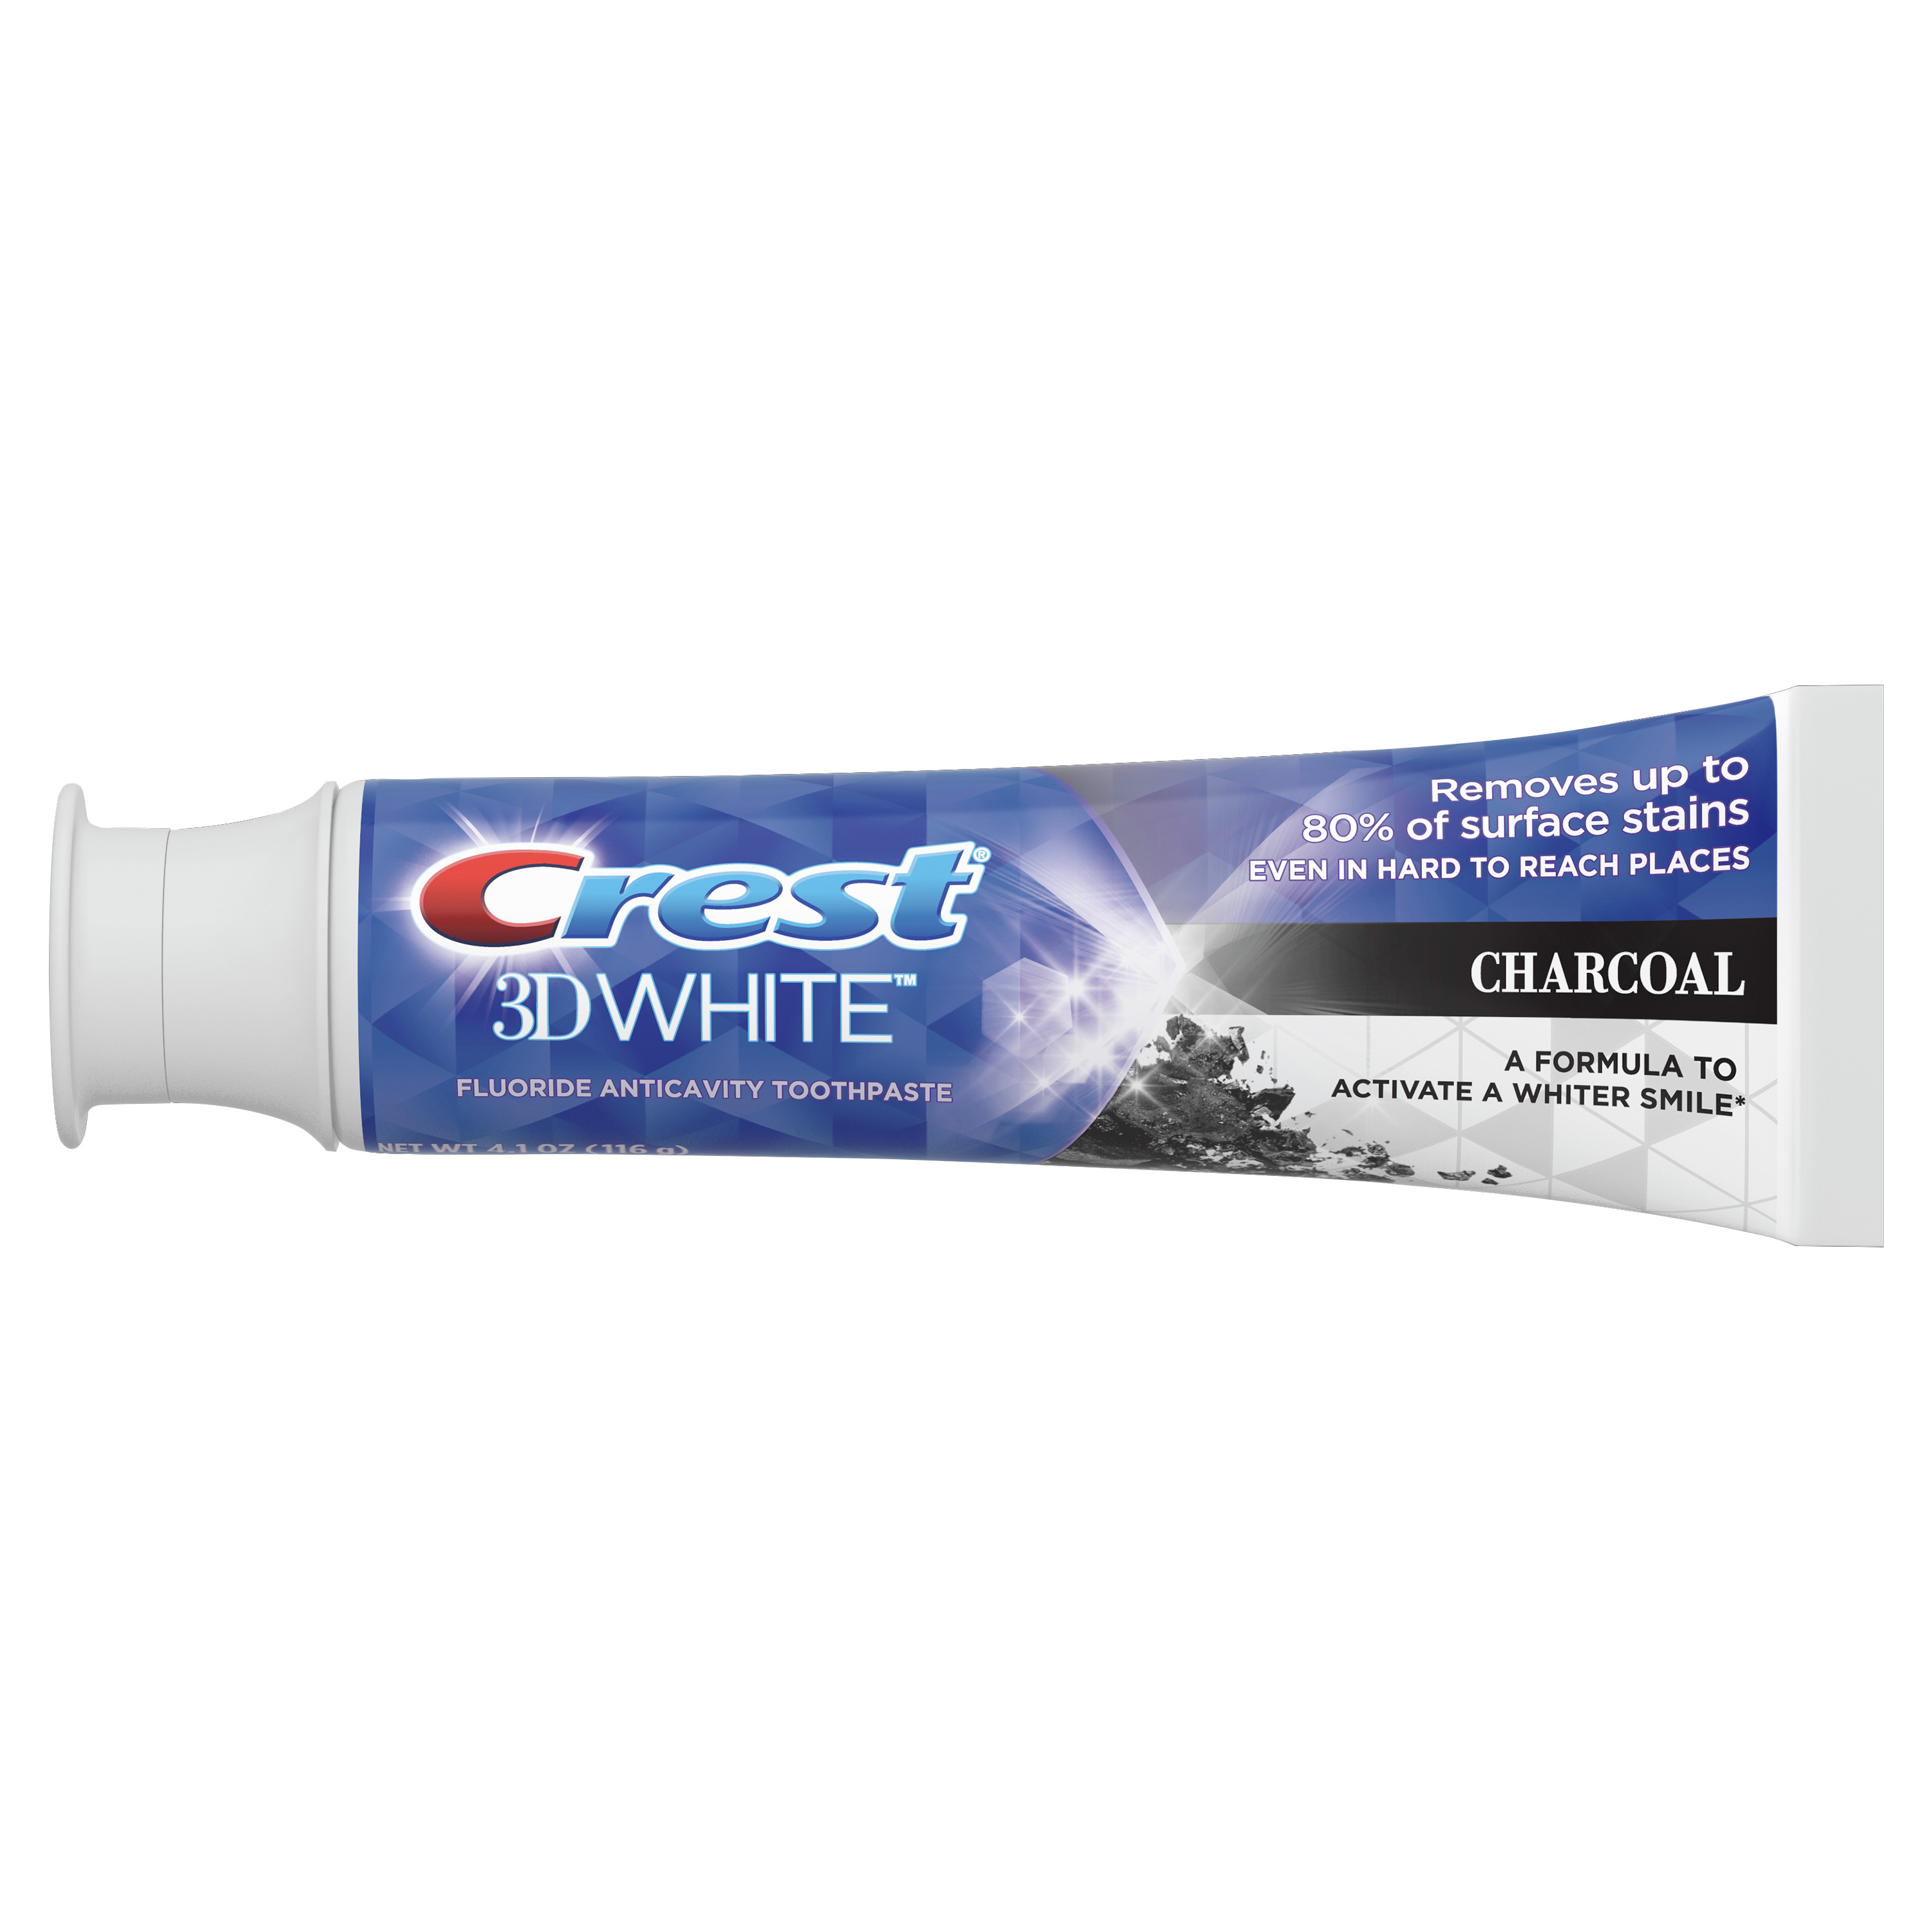 Crest 3D White, Charcoal Whitening Toothpaste, 4.1 oz, Pack of 3 - image 3 of 5